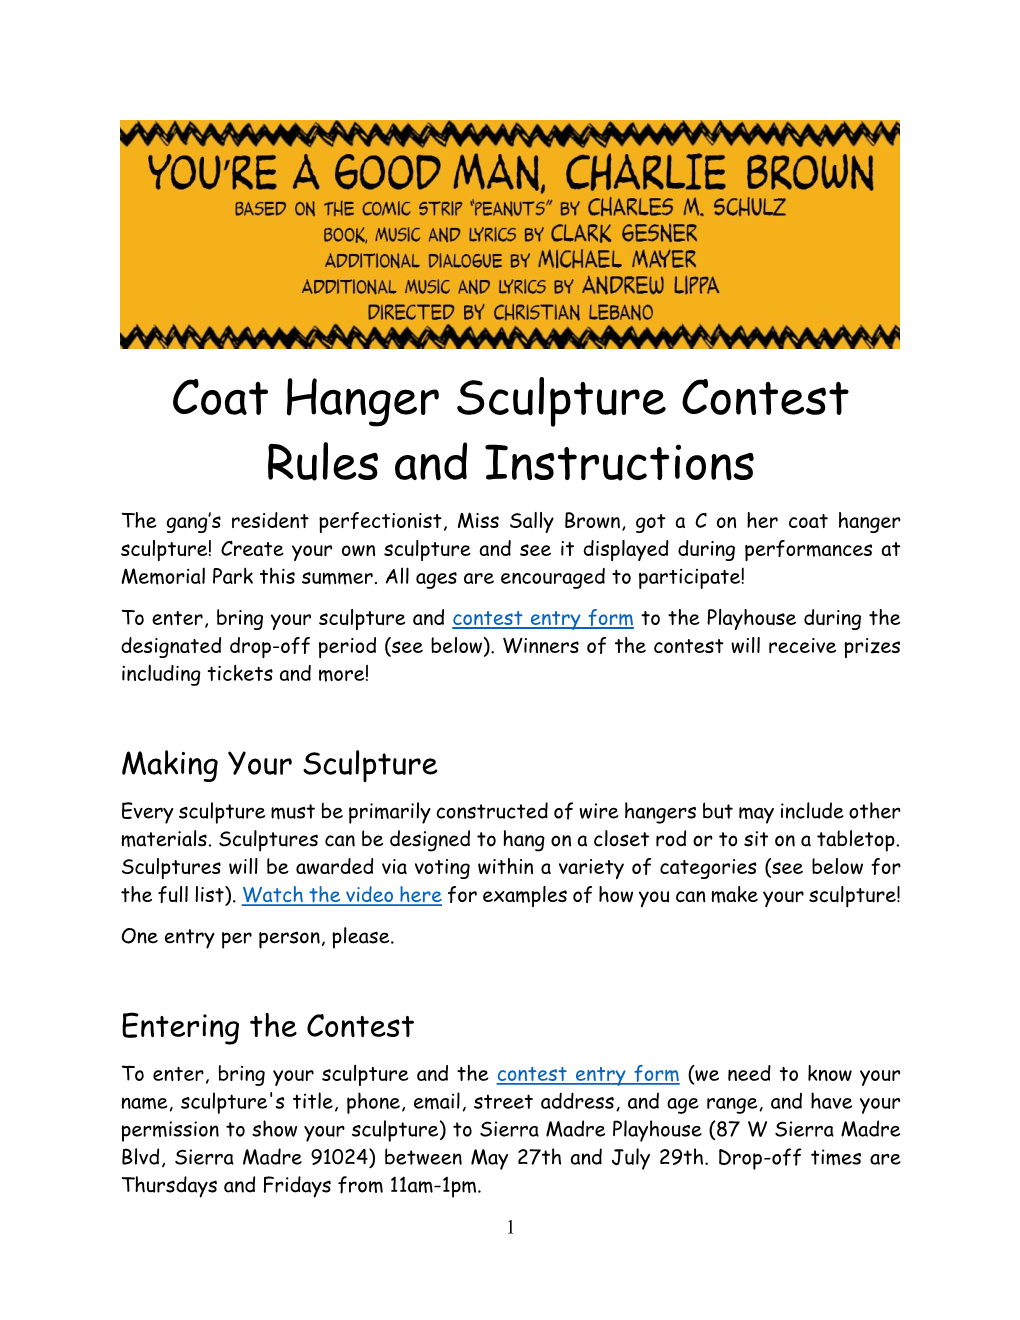 Coat Hanger Sculpture Contest Rules and Instructions